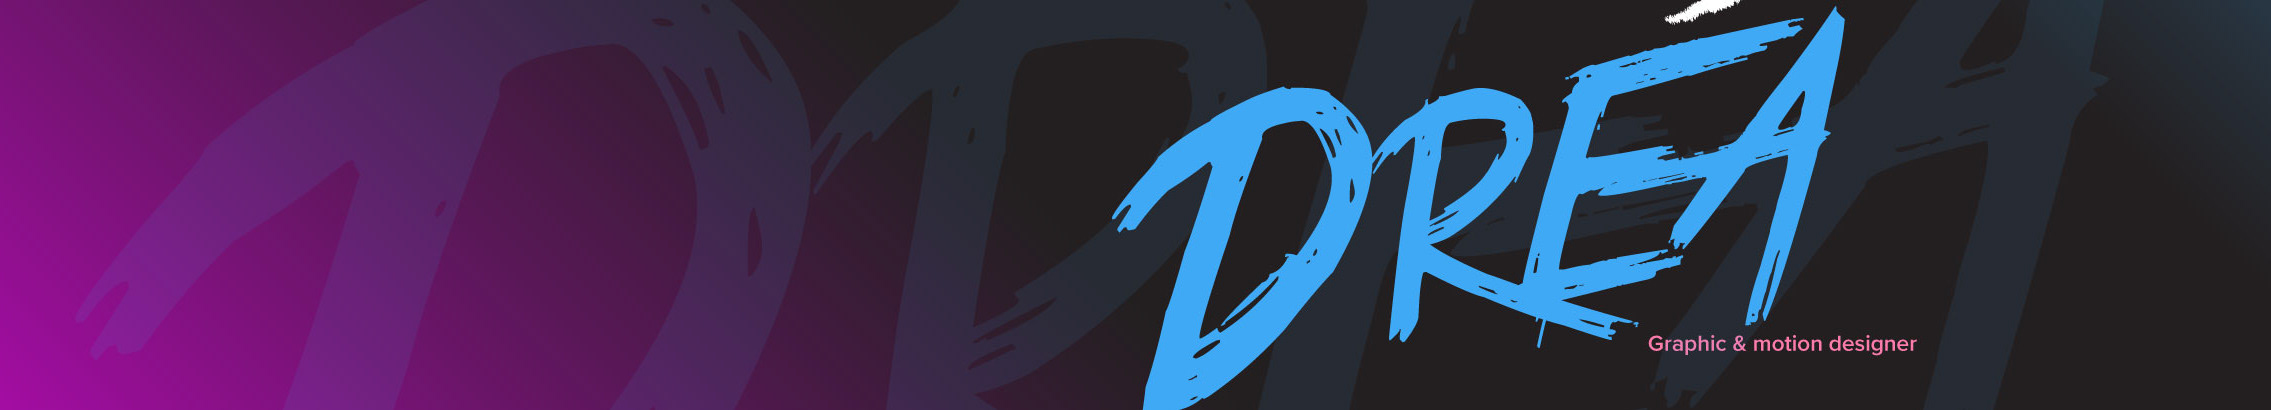 Dréa Bell's profile banner